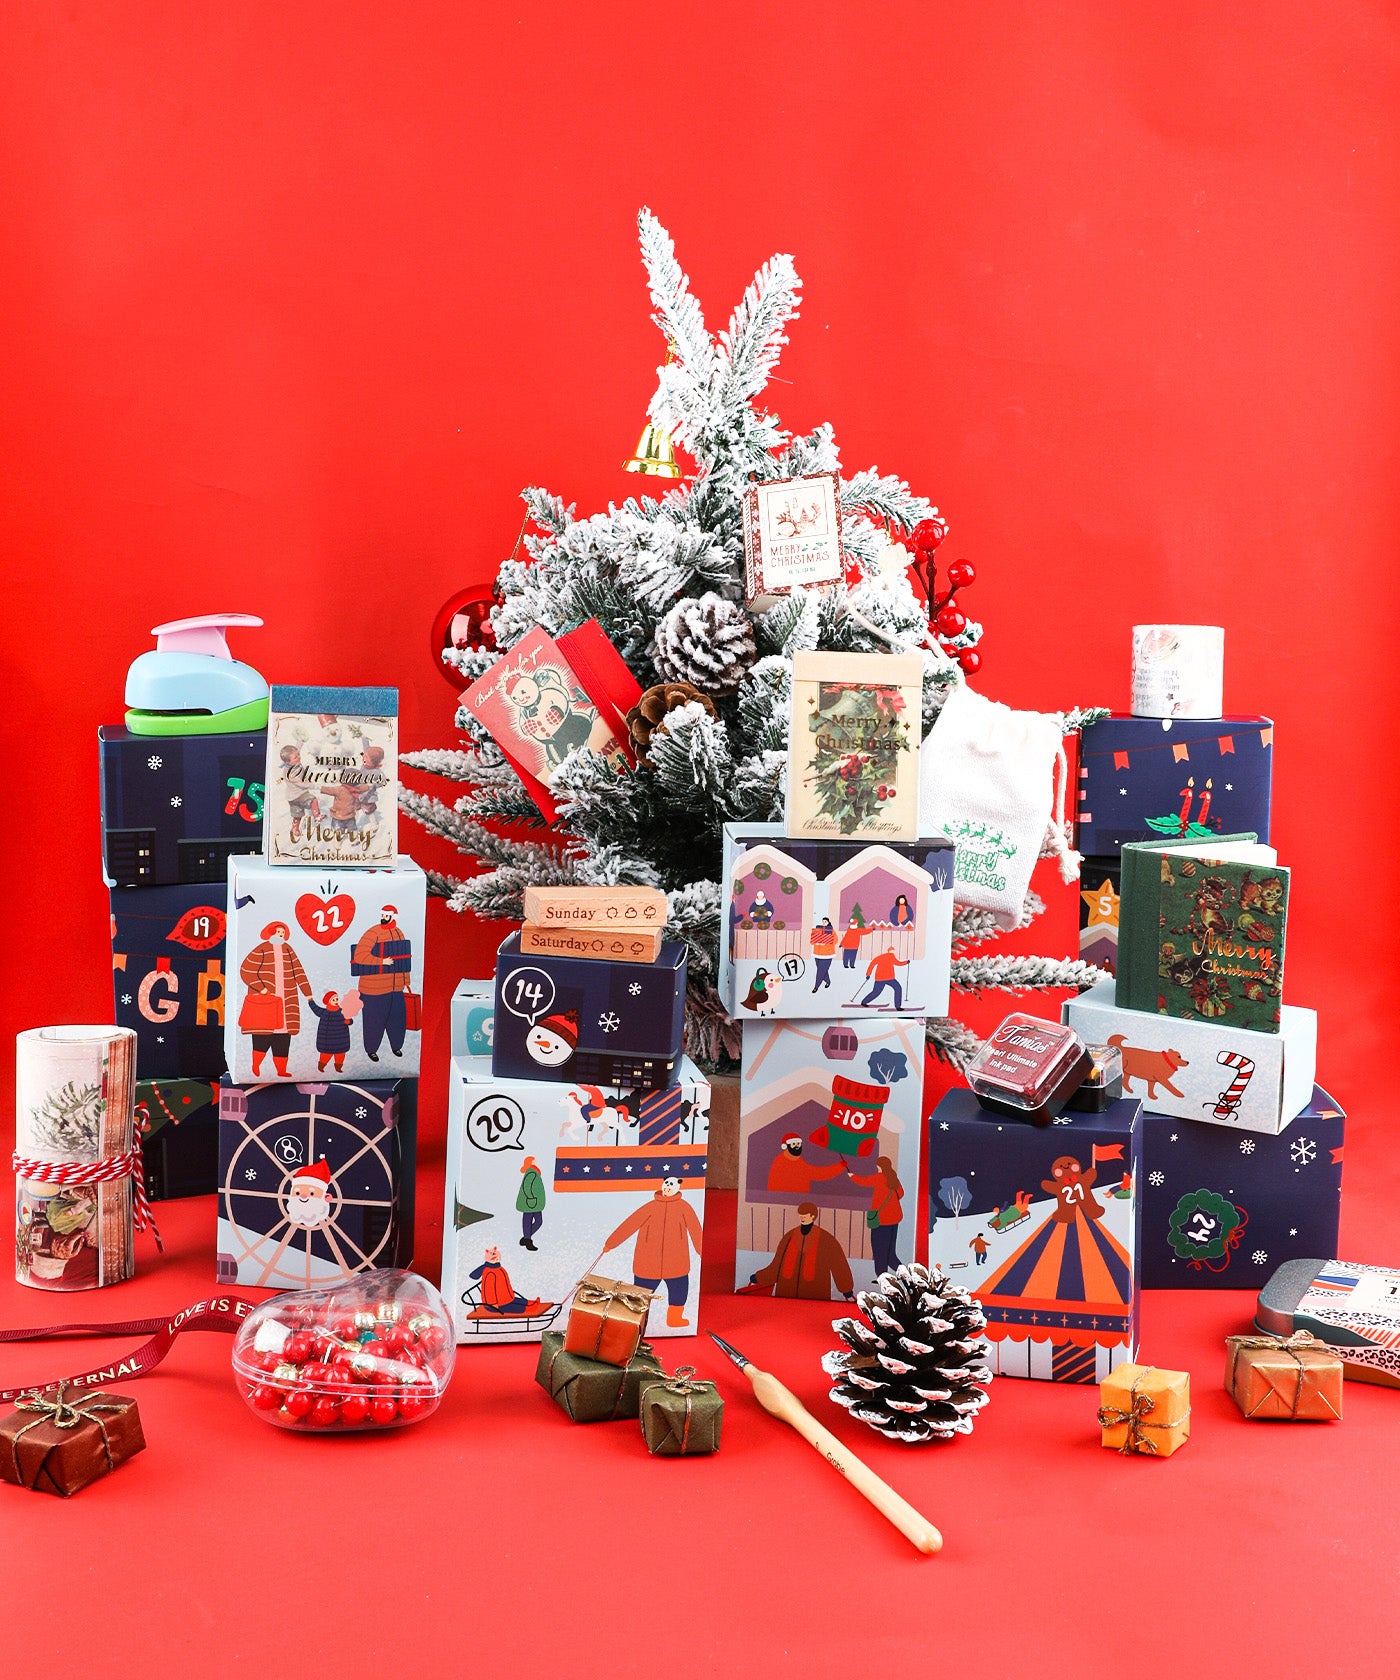 Grabie 2023 Limited Edition Holiday Advent Calendar [PRE-SALE]